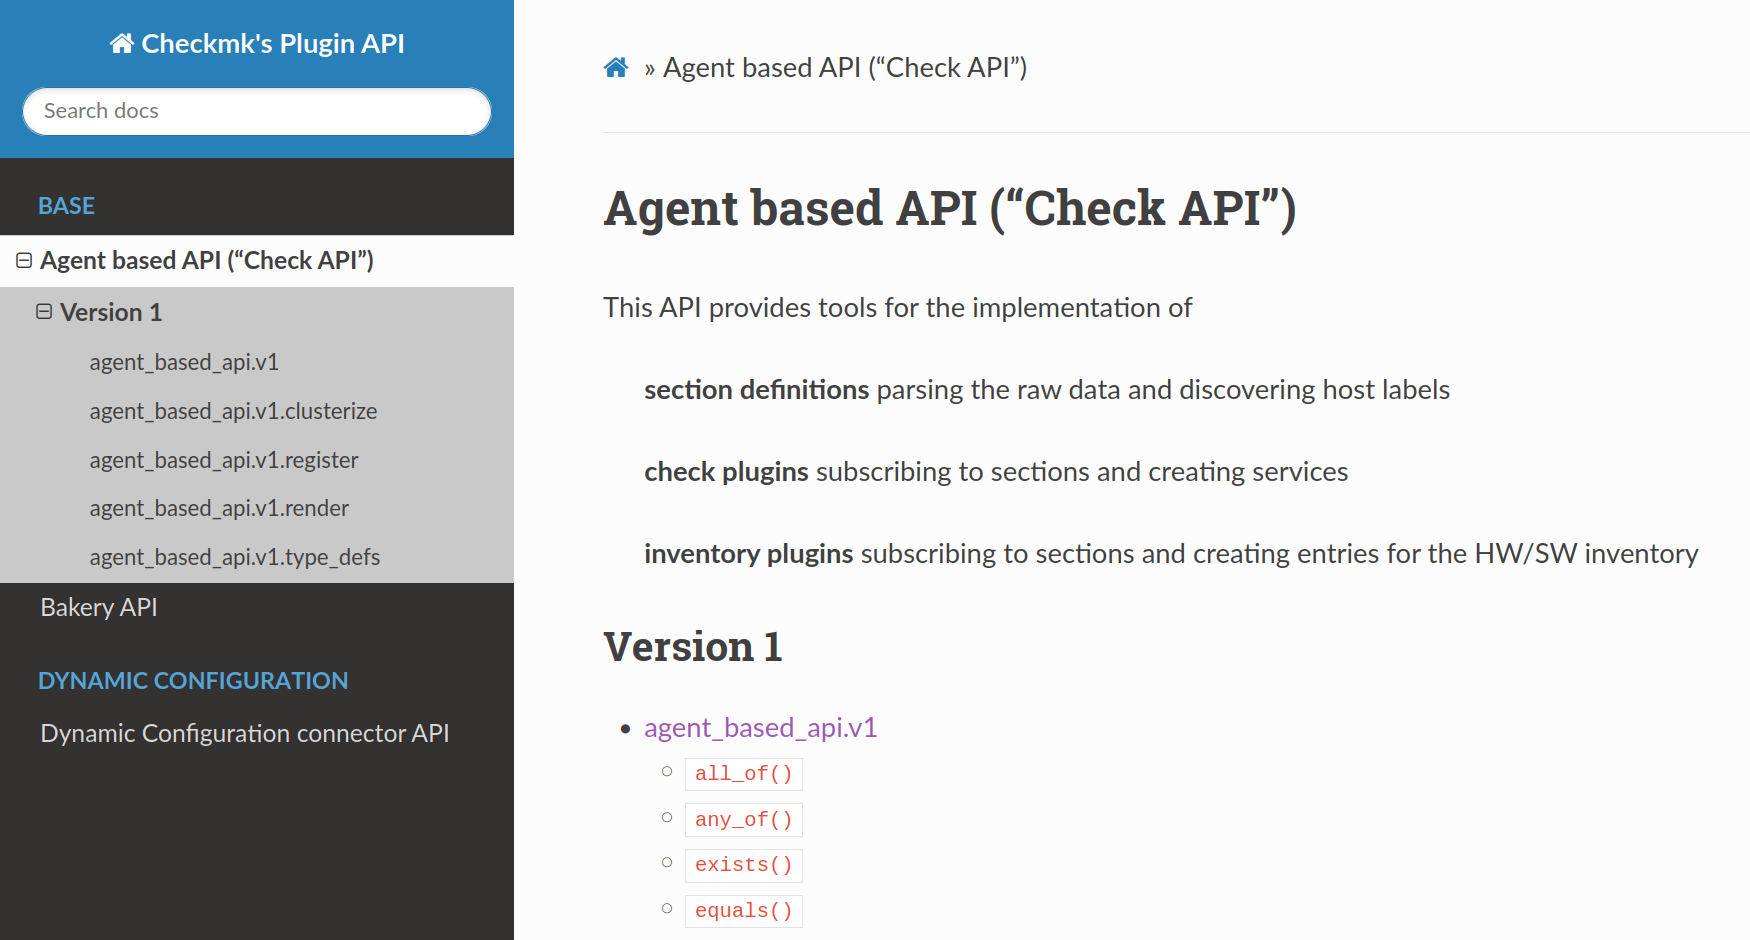 Page for getting started with the Check API documentation.